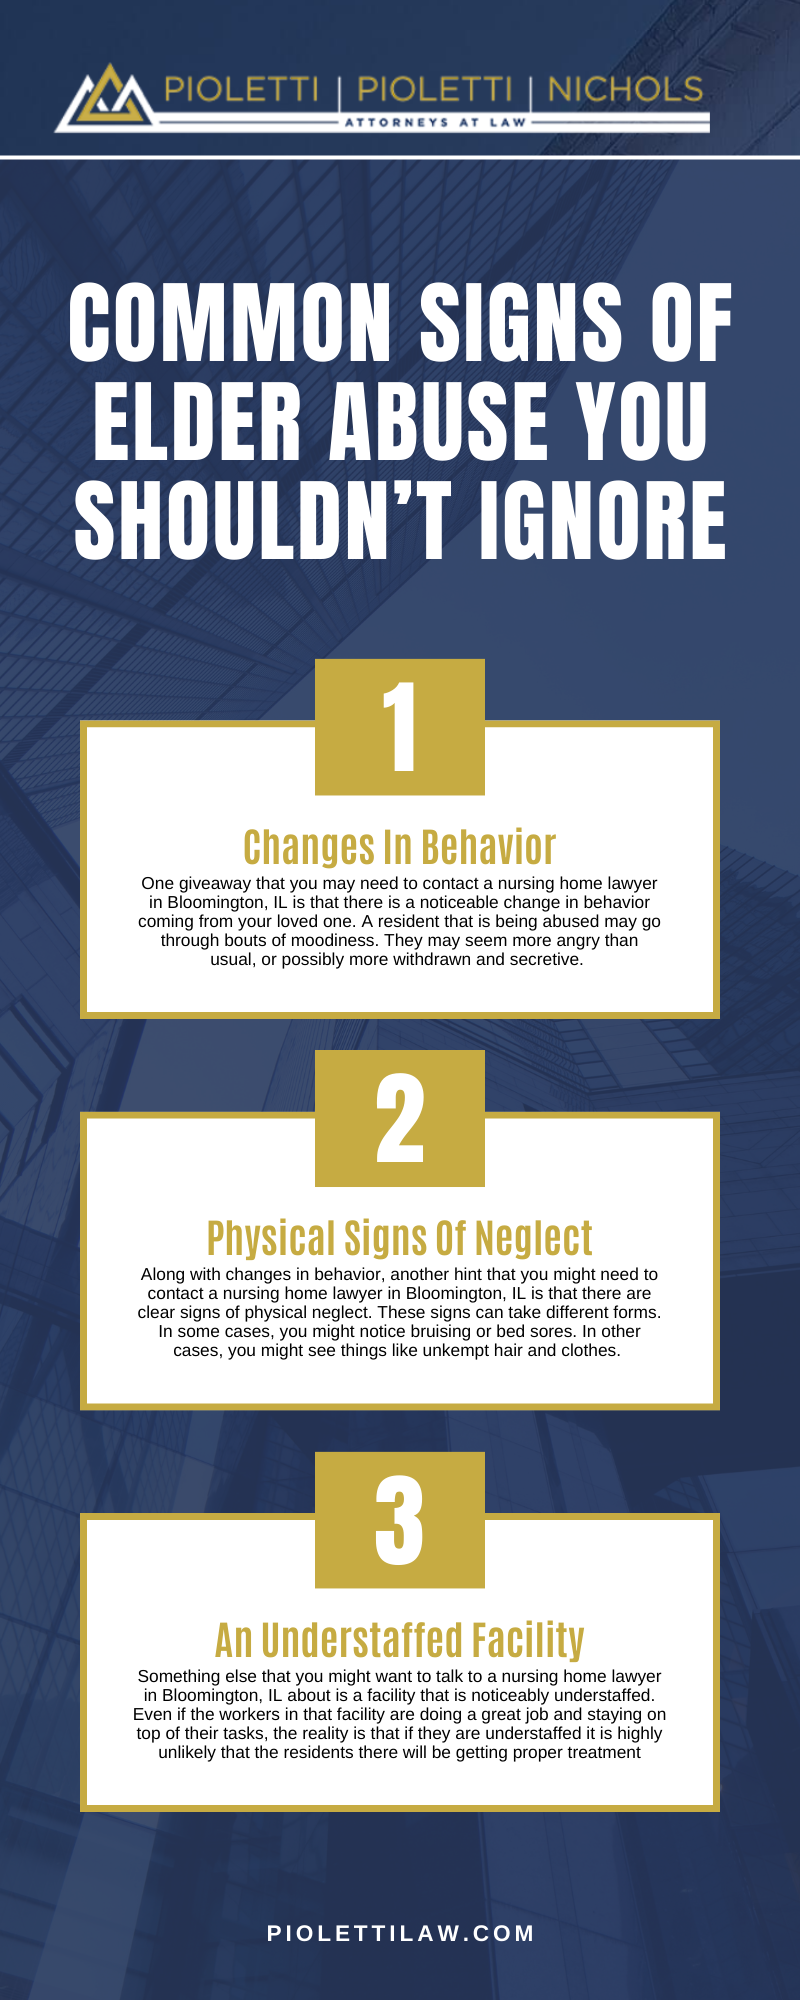 Common Signs Of Elder Abuse You Shouldn't Ignore Infographic